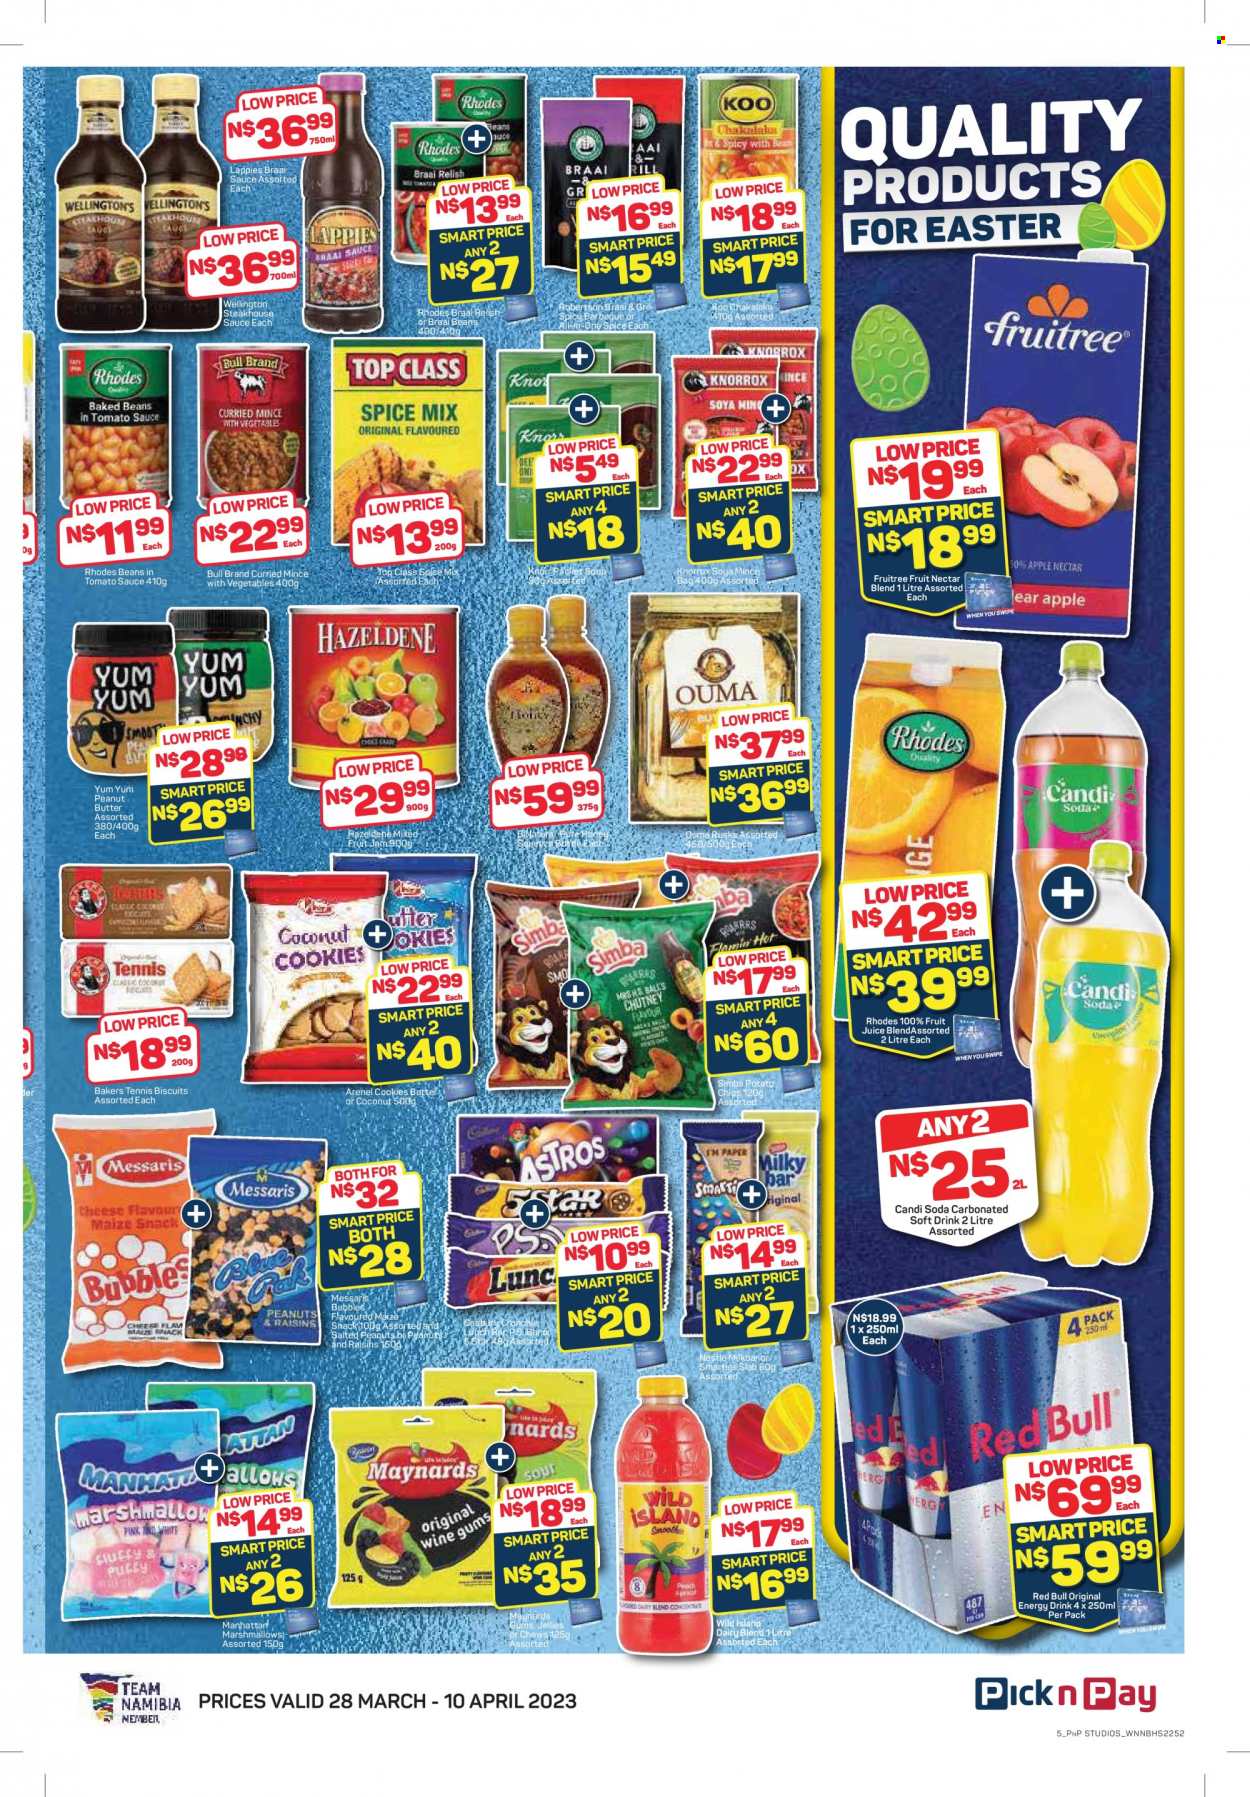 thumbnail - Pick n Pay catalogue  - 28/03/2023 - 10/04/2023 - Sales products - rusks, beans, soup, Knorr, chakalaka, dairy blend, cookies, marshmallows, Nestlé, snack, Smarties, chewing gum, biscuit, Cadbury, potato chips, chips, maize snack, Simba, soya mince, Knorrox, Koo, spice, spice all-in-one, honey, fruit jam, peanut butter, Hazeldene, peanuts, energy drink, fruit juice, juice, fruit nectar, soft drink, Red Bull, soda, carbonated soft drink, Bakers. Page 5.